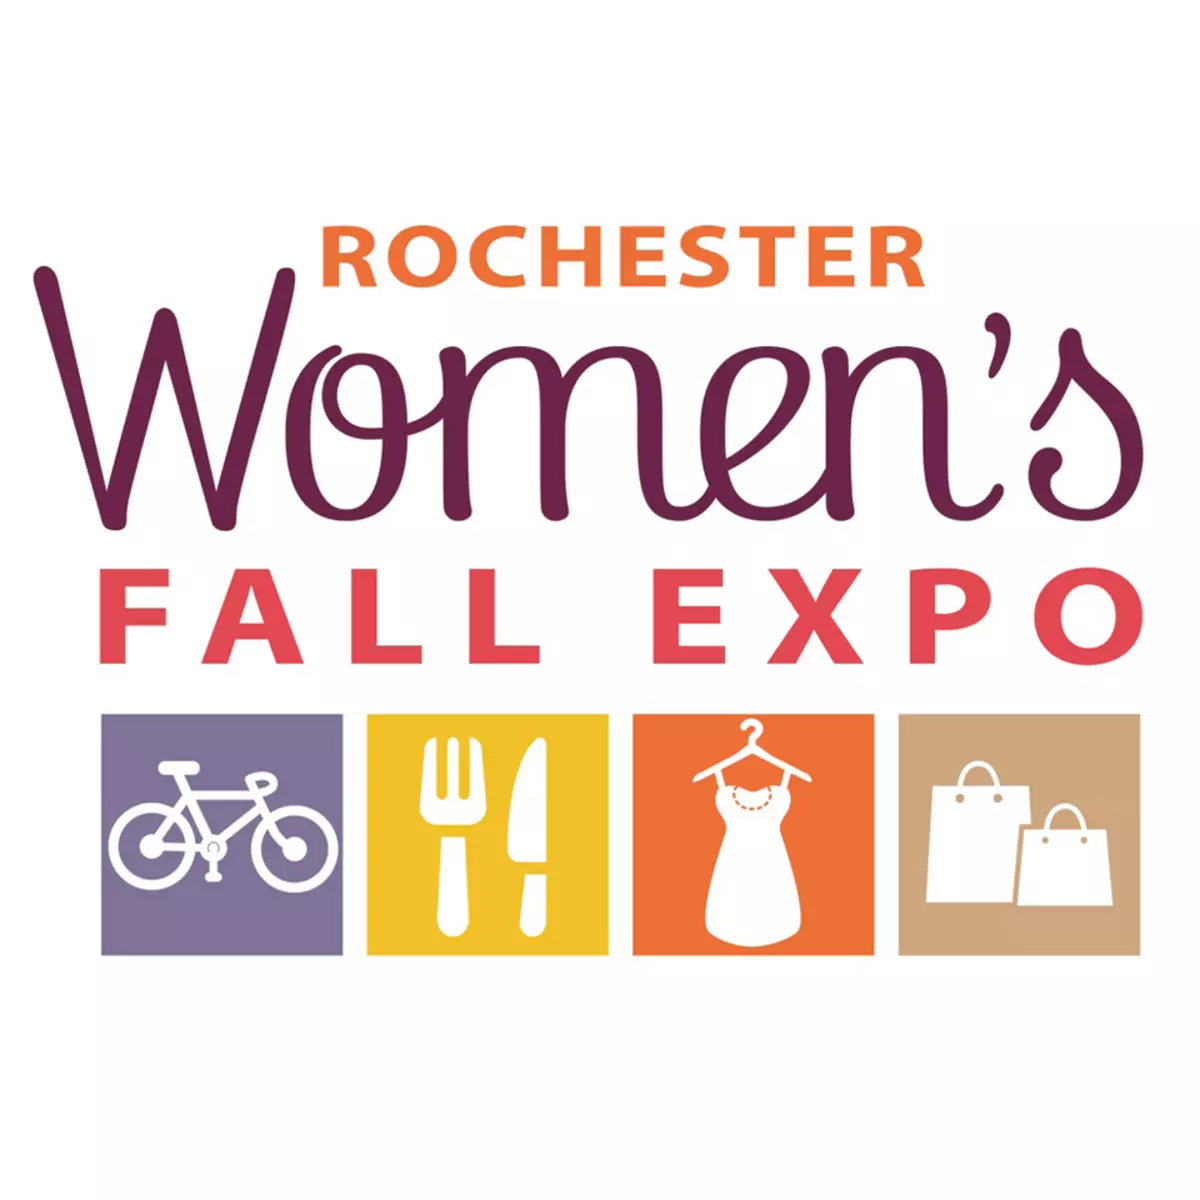 5 Reasons To Go To The Rochester Women's Fall Expo This Saturday